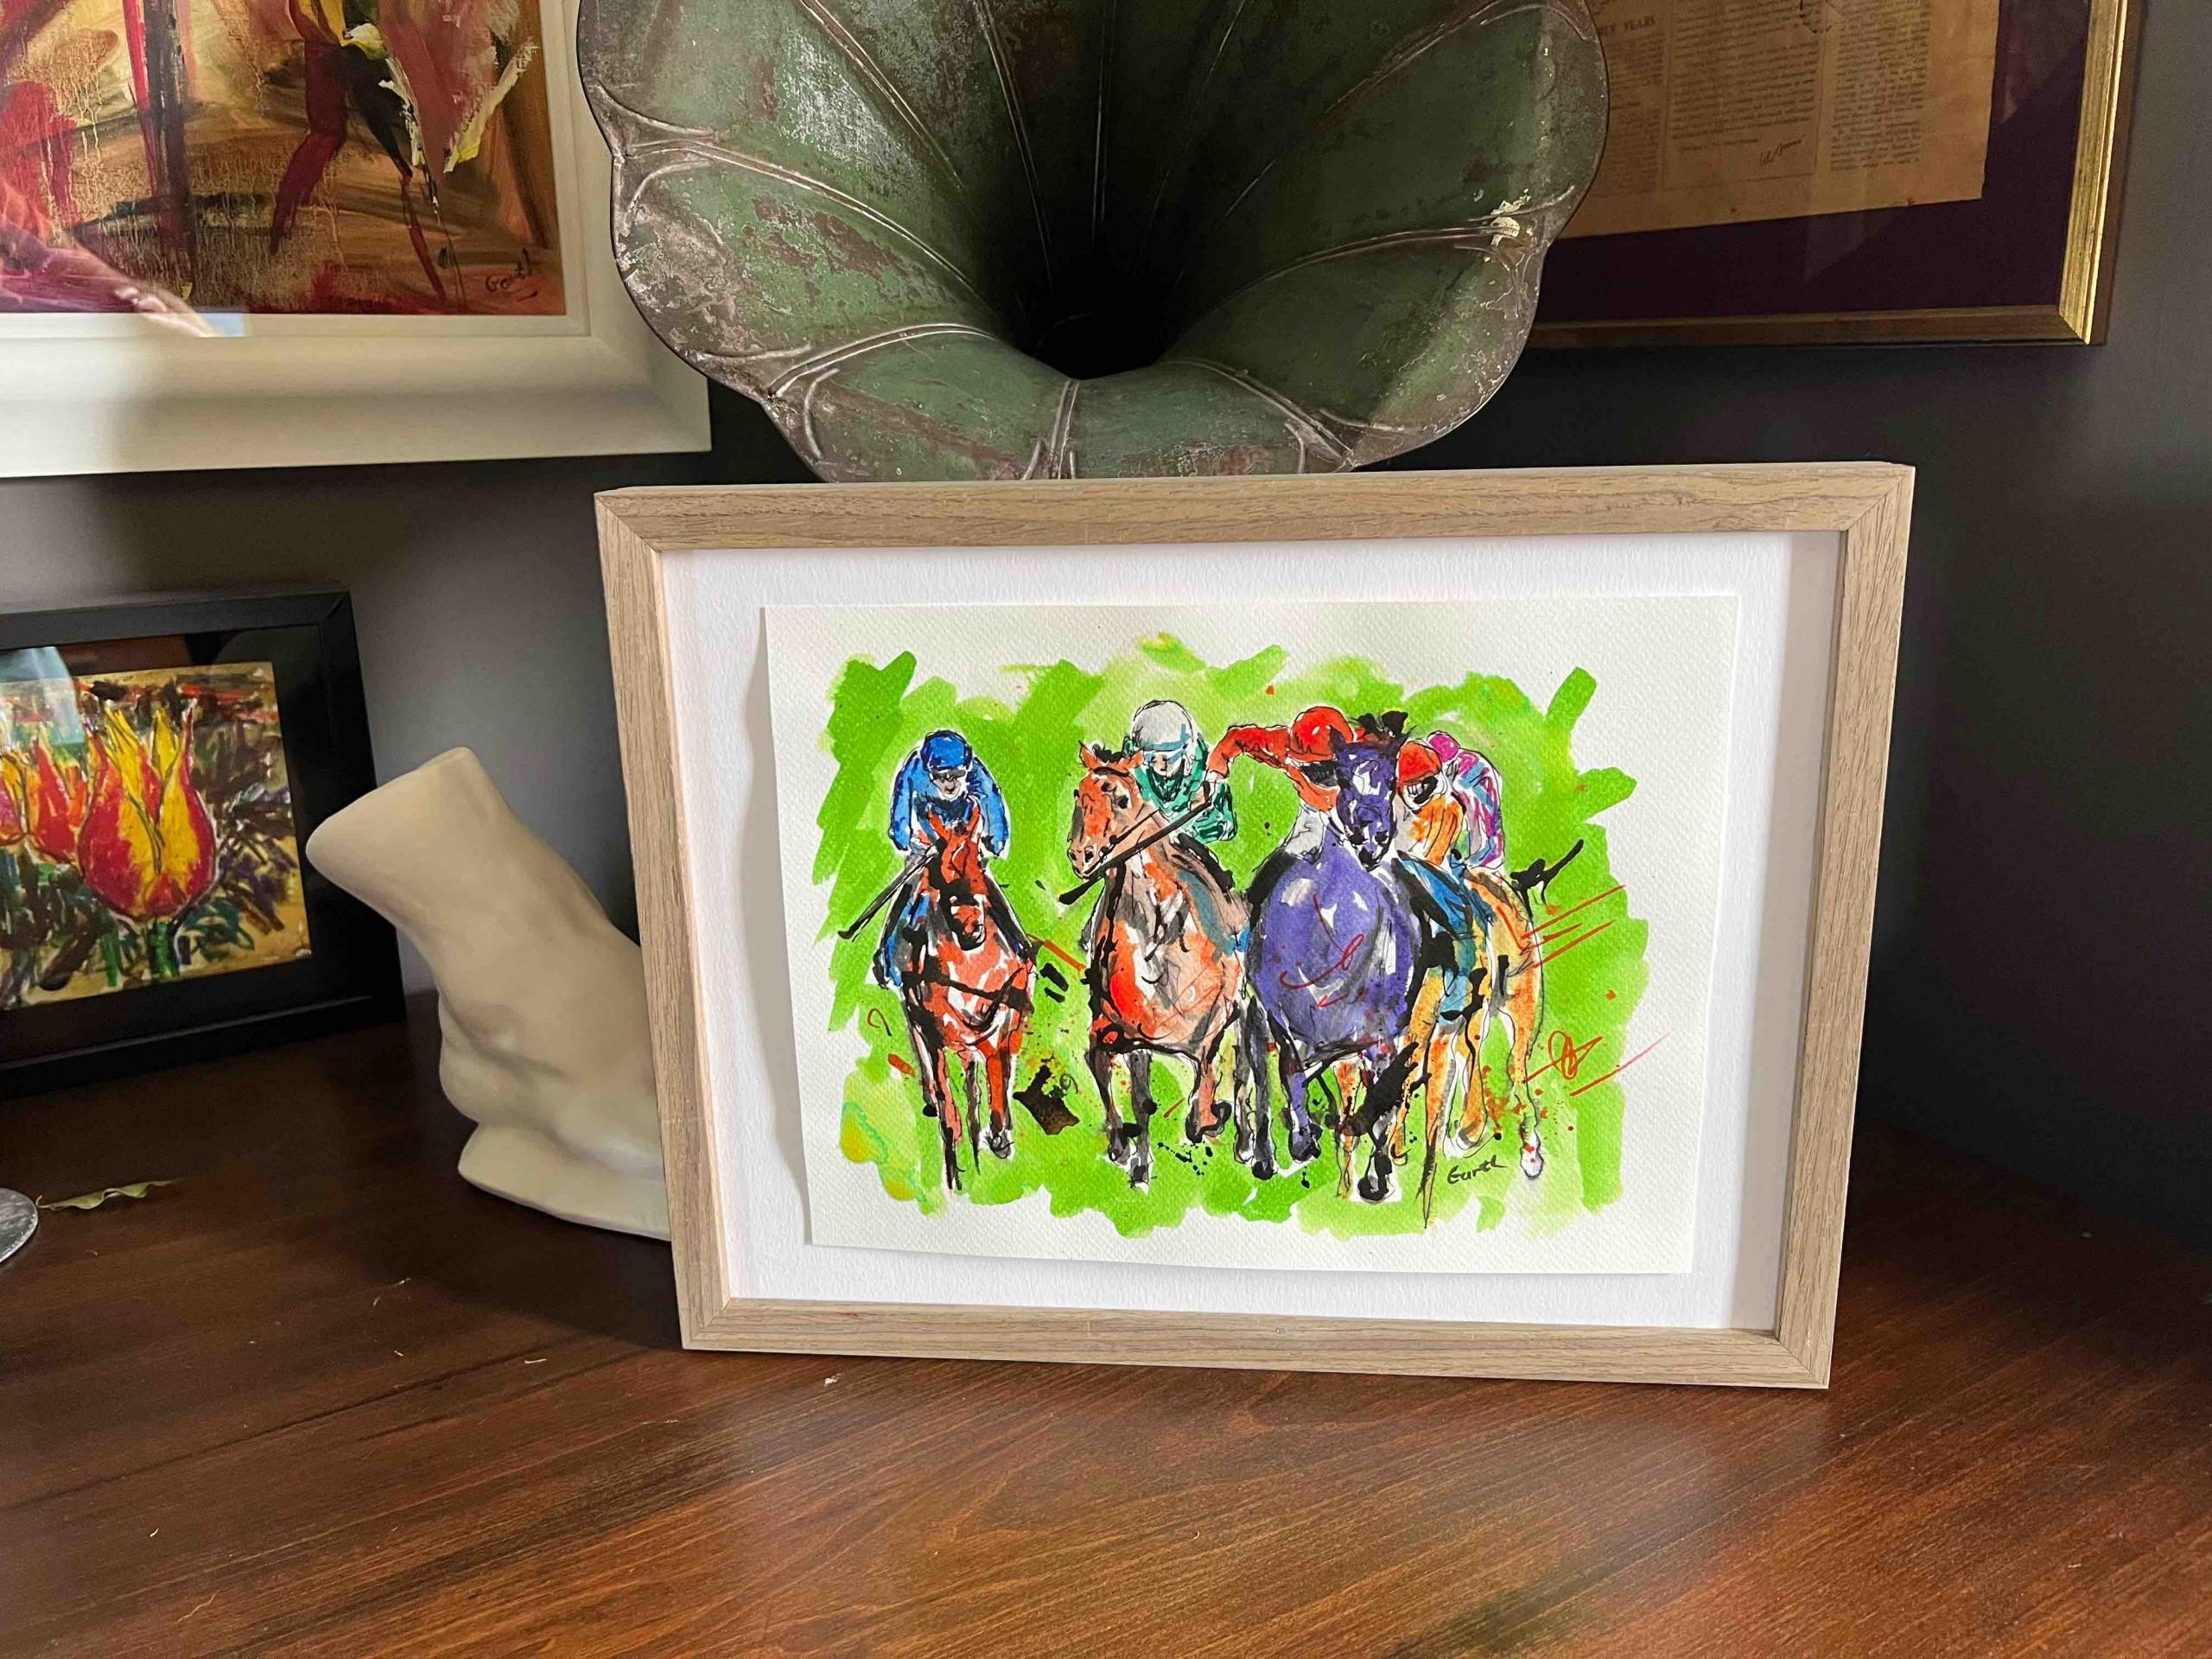 The thunder of Hooves . Horse racing . Garth Bayley [2022]
original

Pen and Ink

Image size: H:24 cm x W:32 cm

Complete Size of Unframed Work: H:24 cm x W:32 cm x D:0.1cm

Sold Unframed

Please note that insitu images are purely an indication of